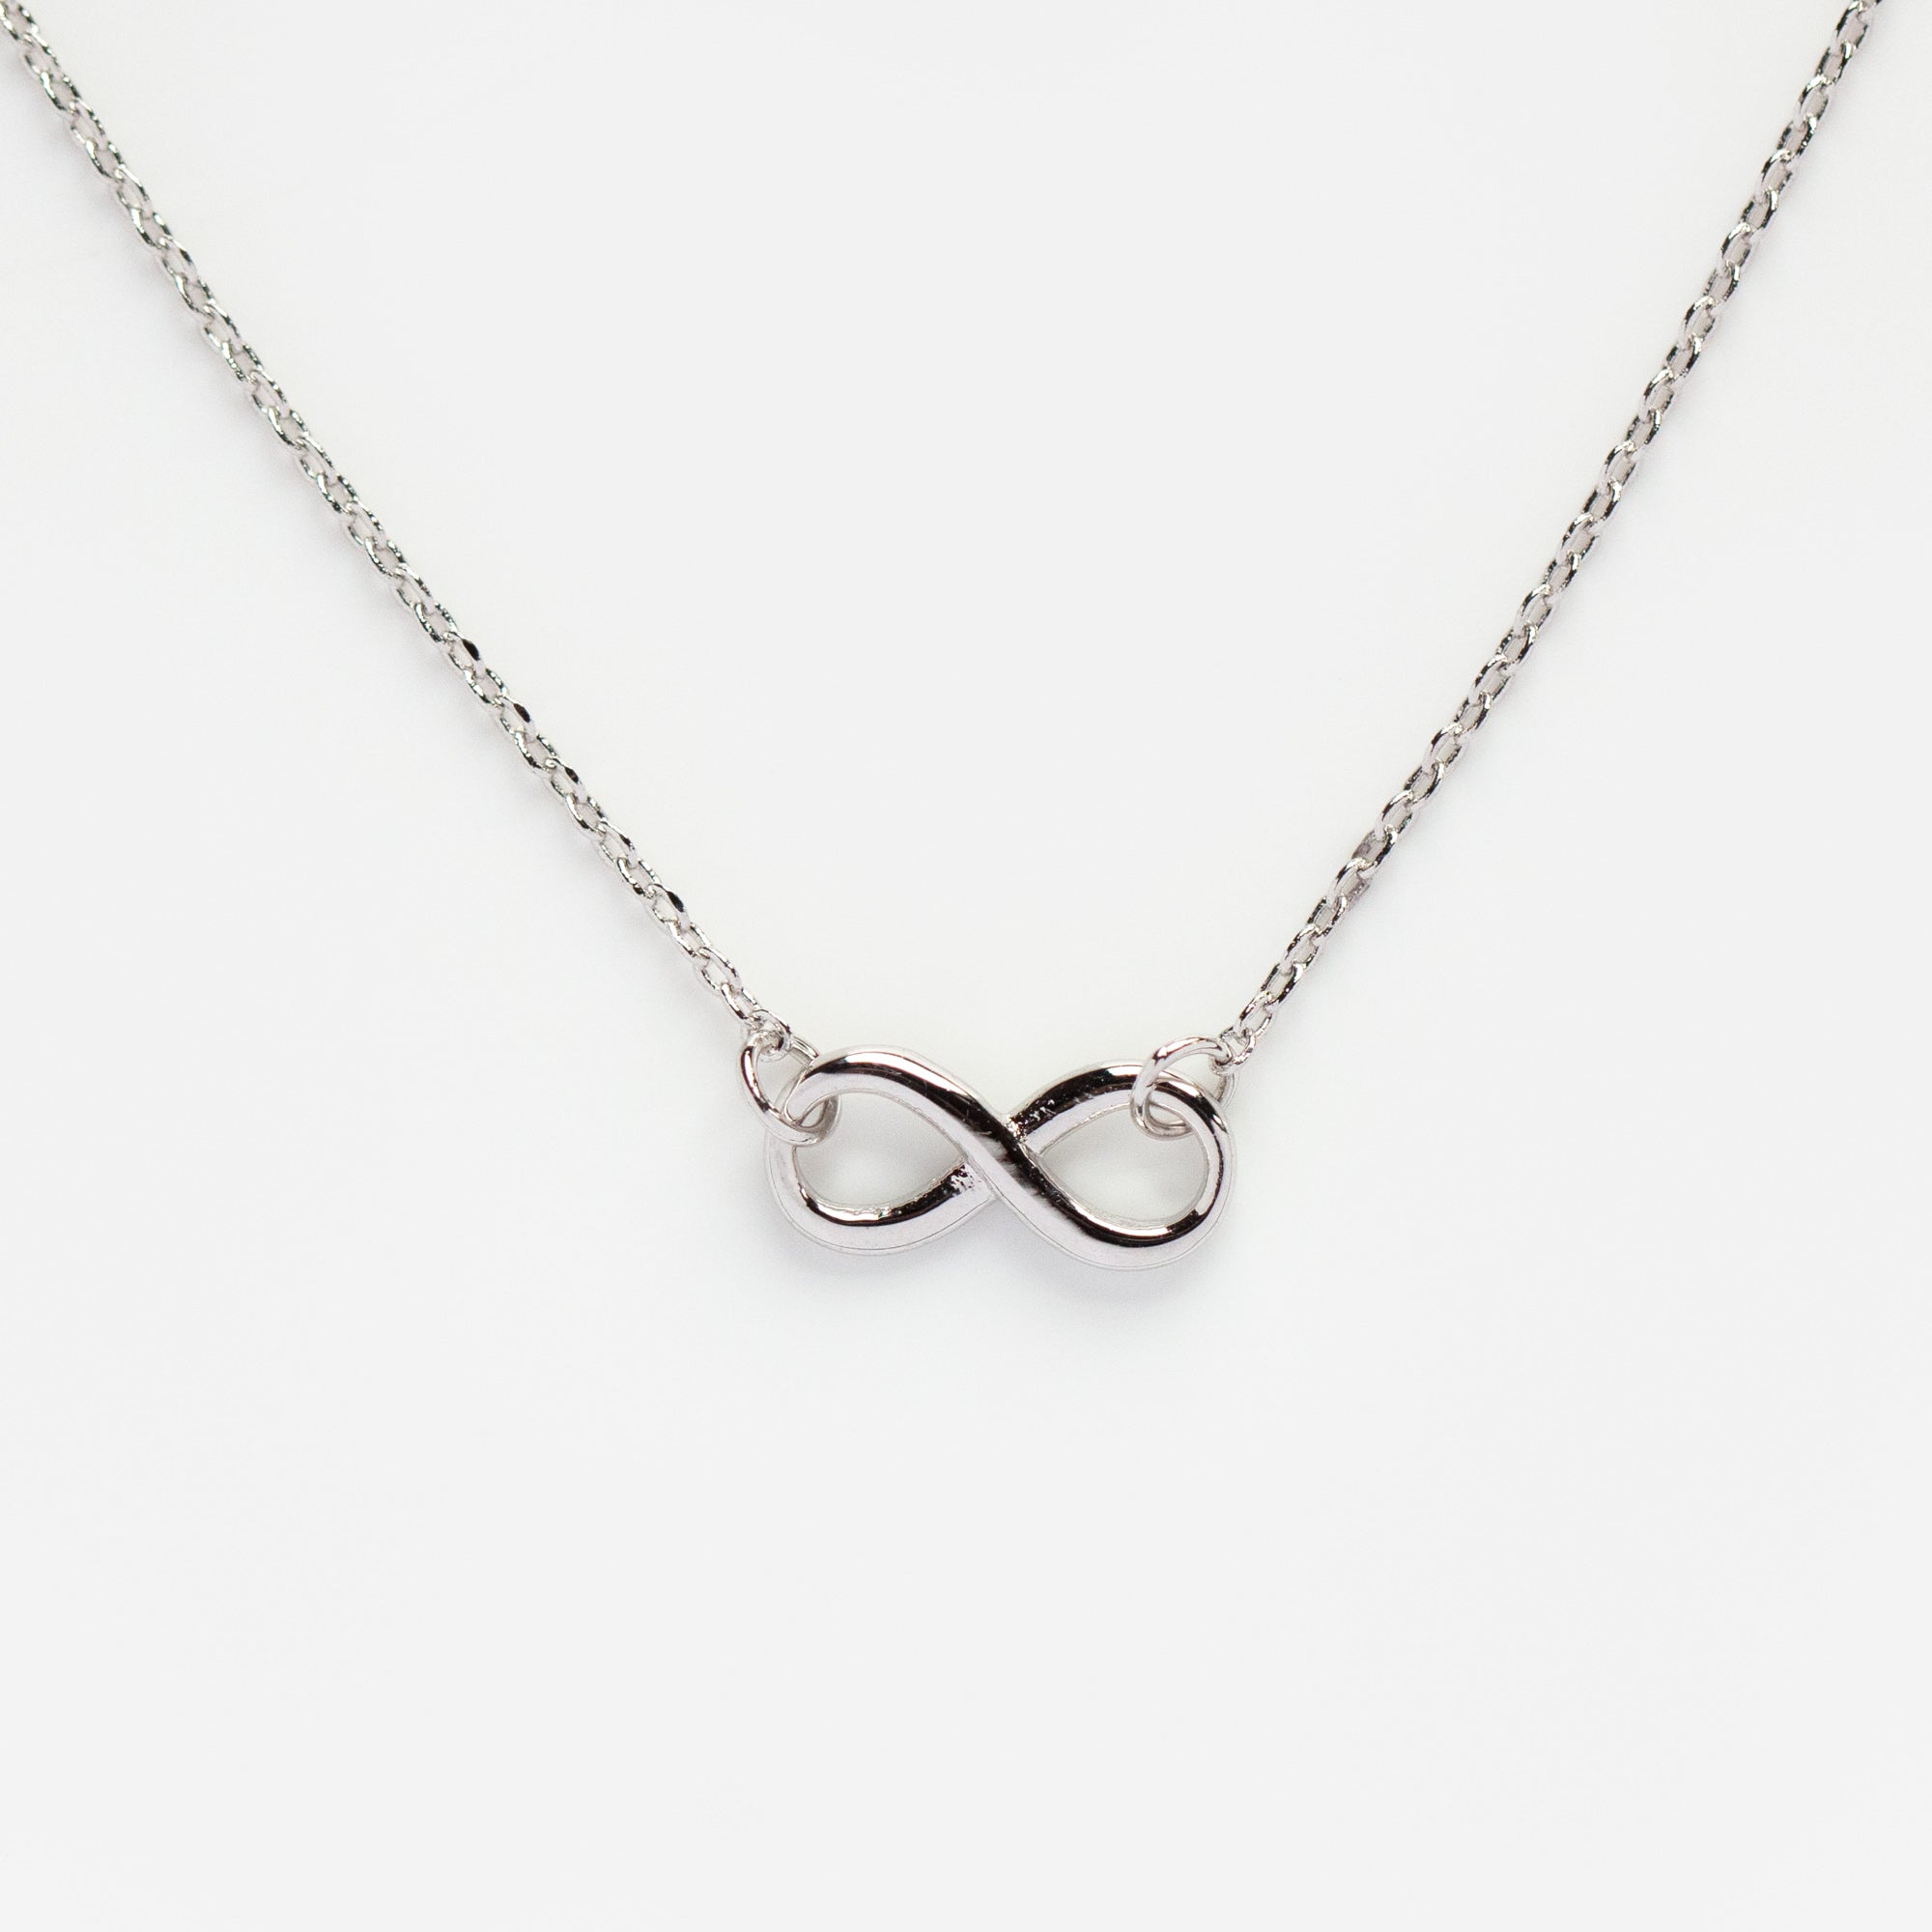 Local Eclectic The Summer I Turned Pretty Infinity Necklace